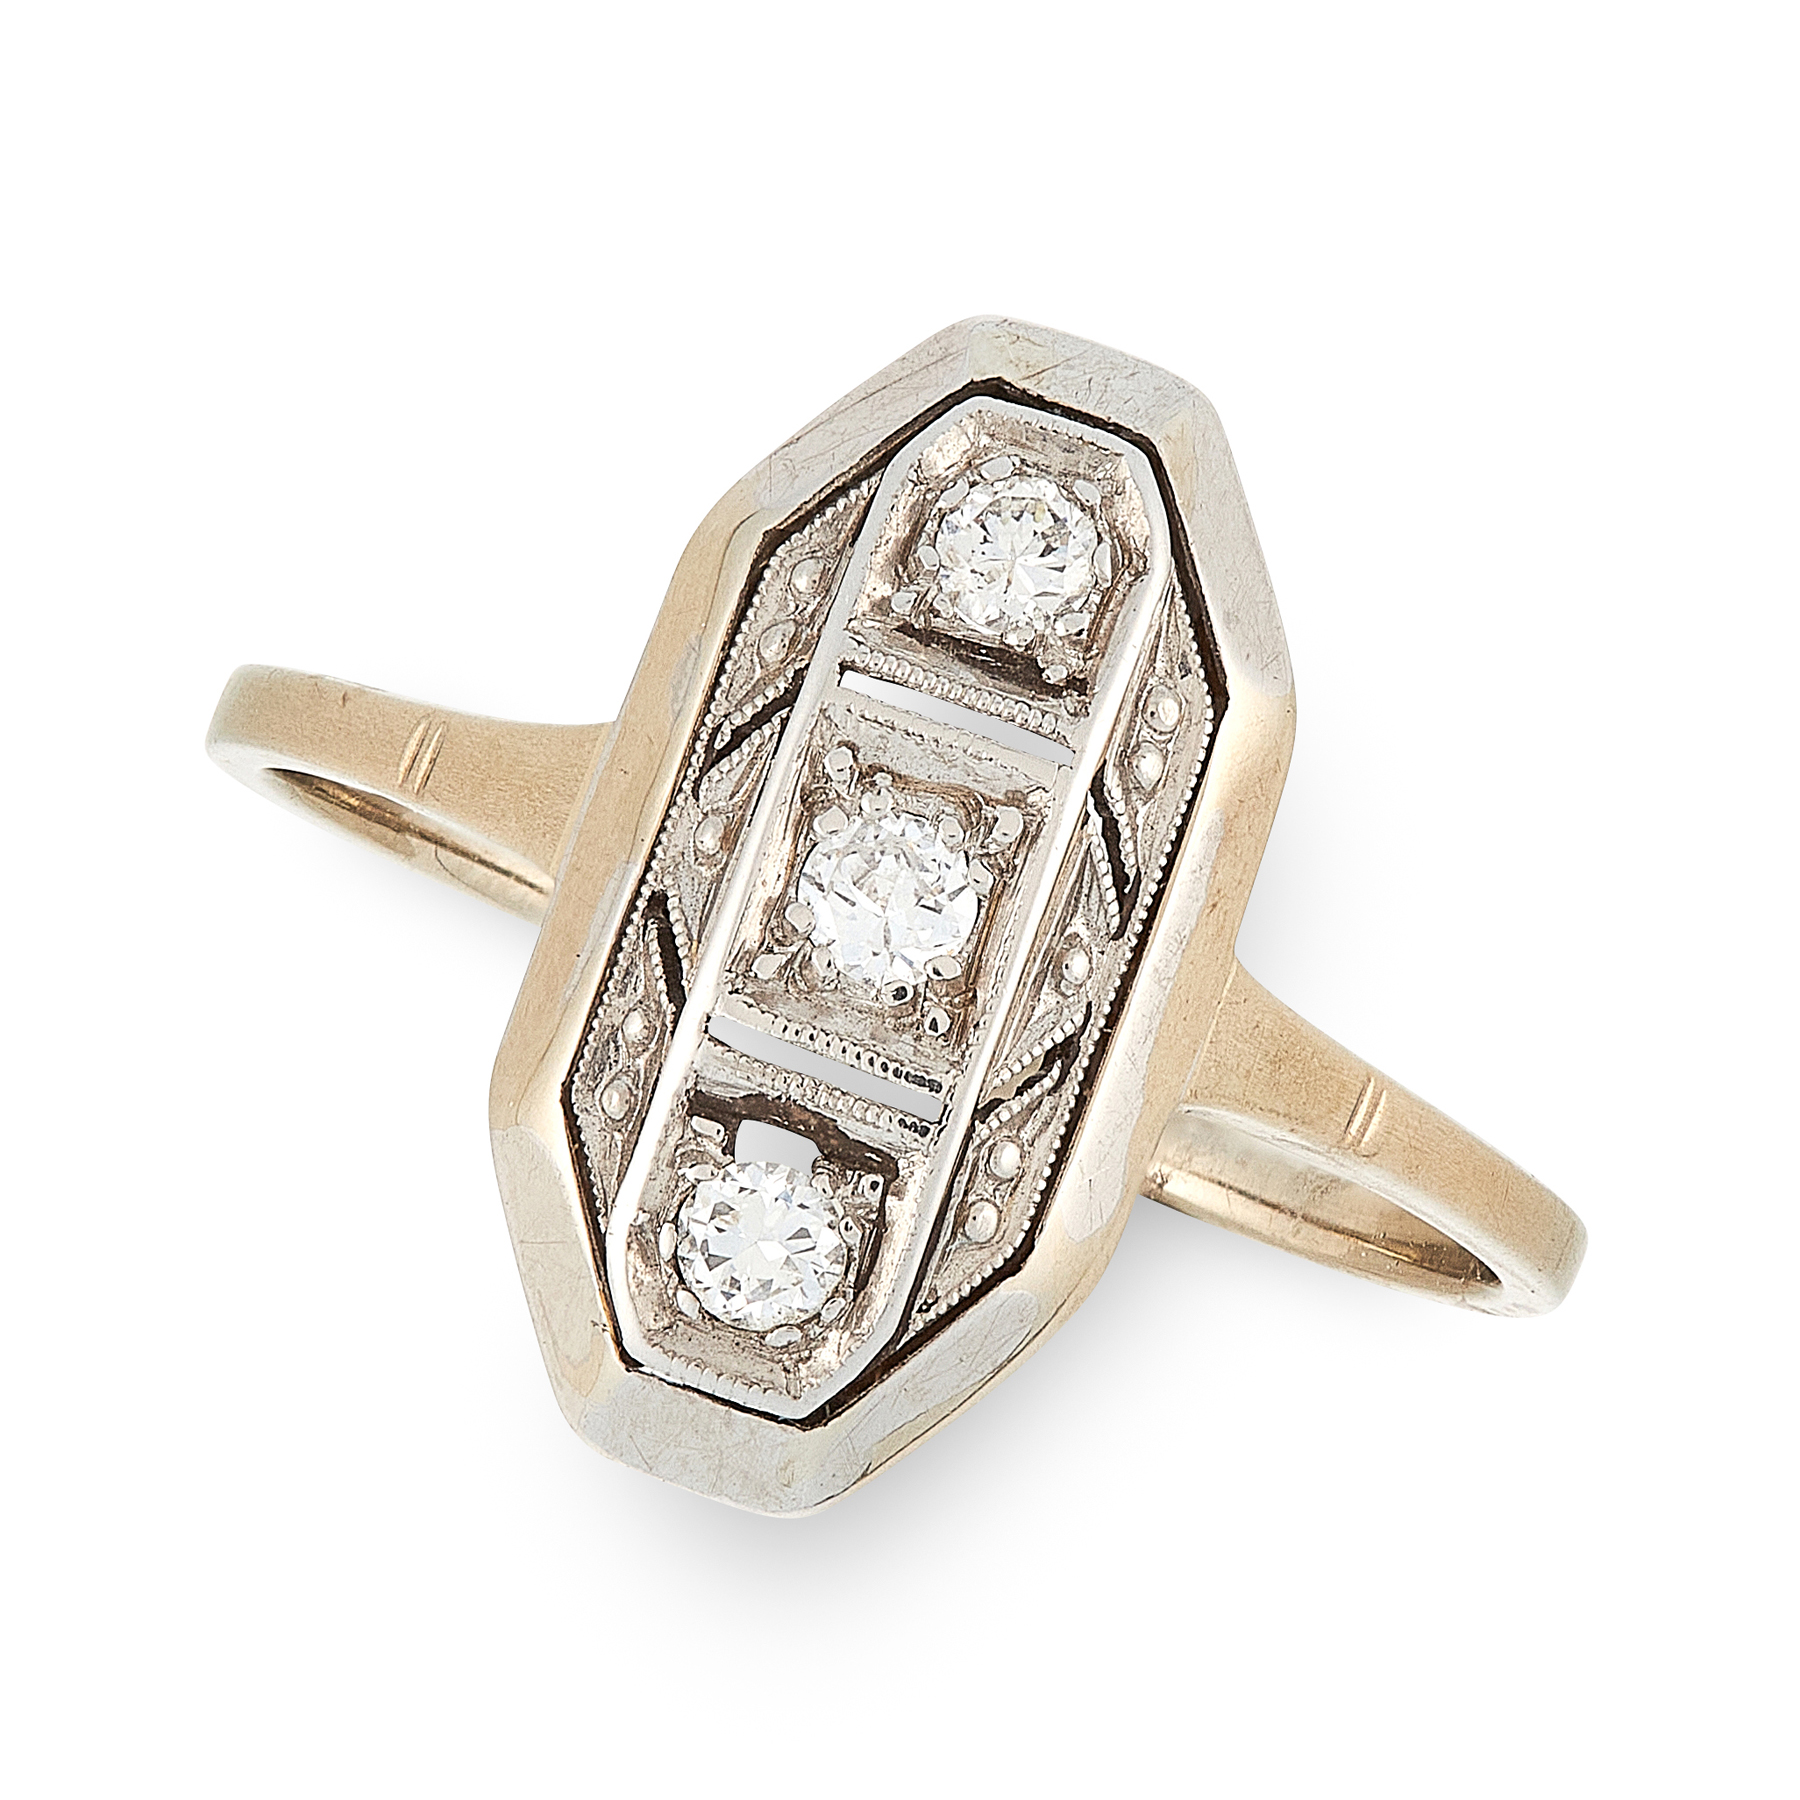 A DIAMOND DRESS RING, CIRCA 1940 in 14ct white gold, the elongated octagonal face set with a trio of